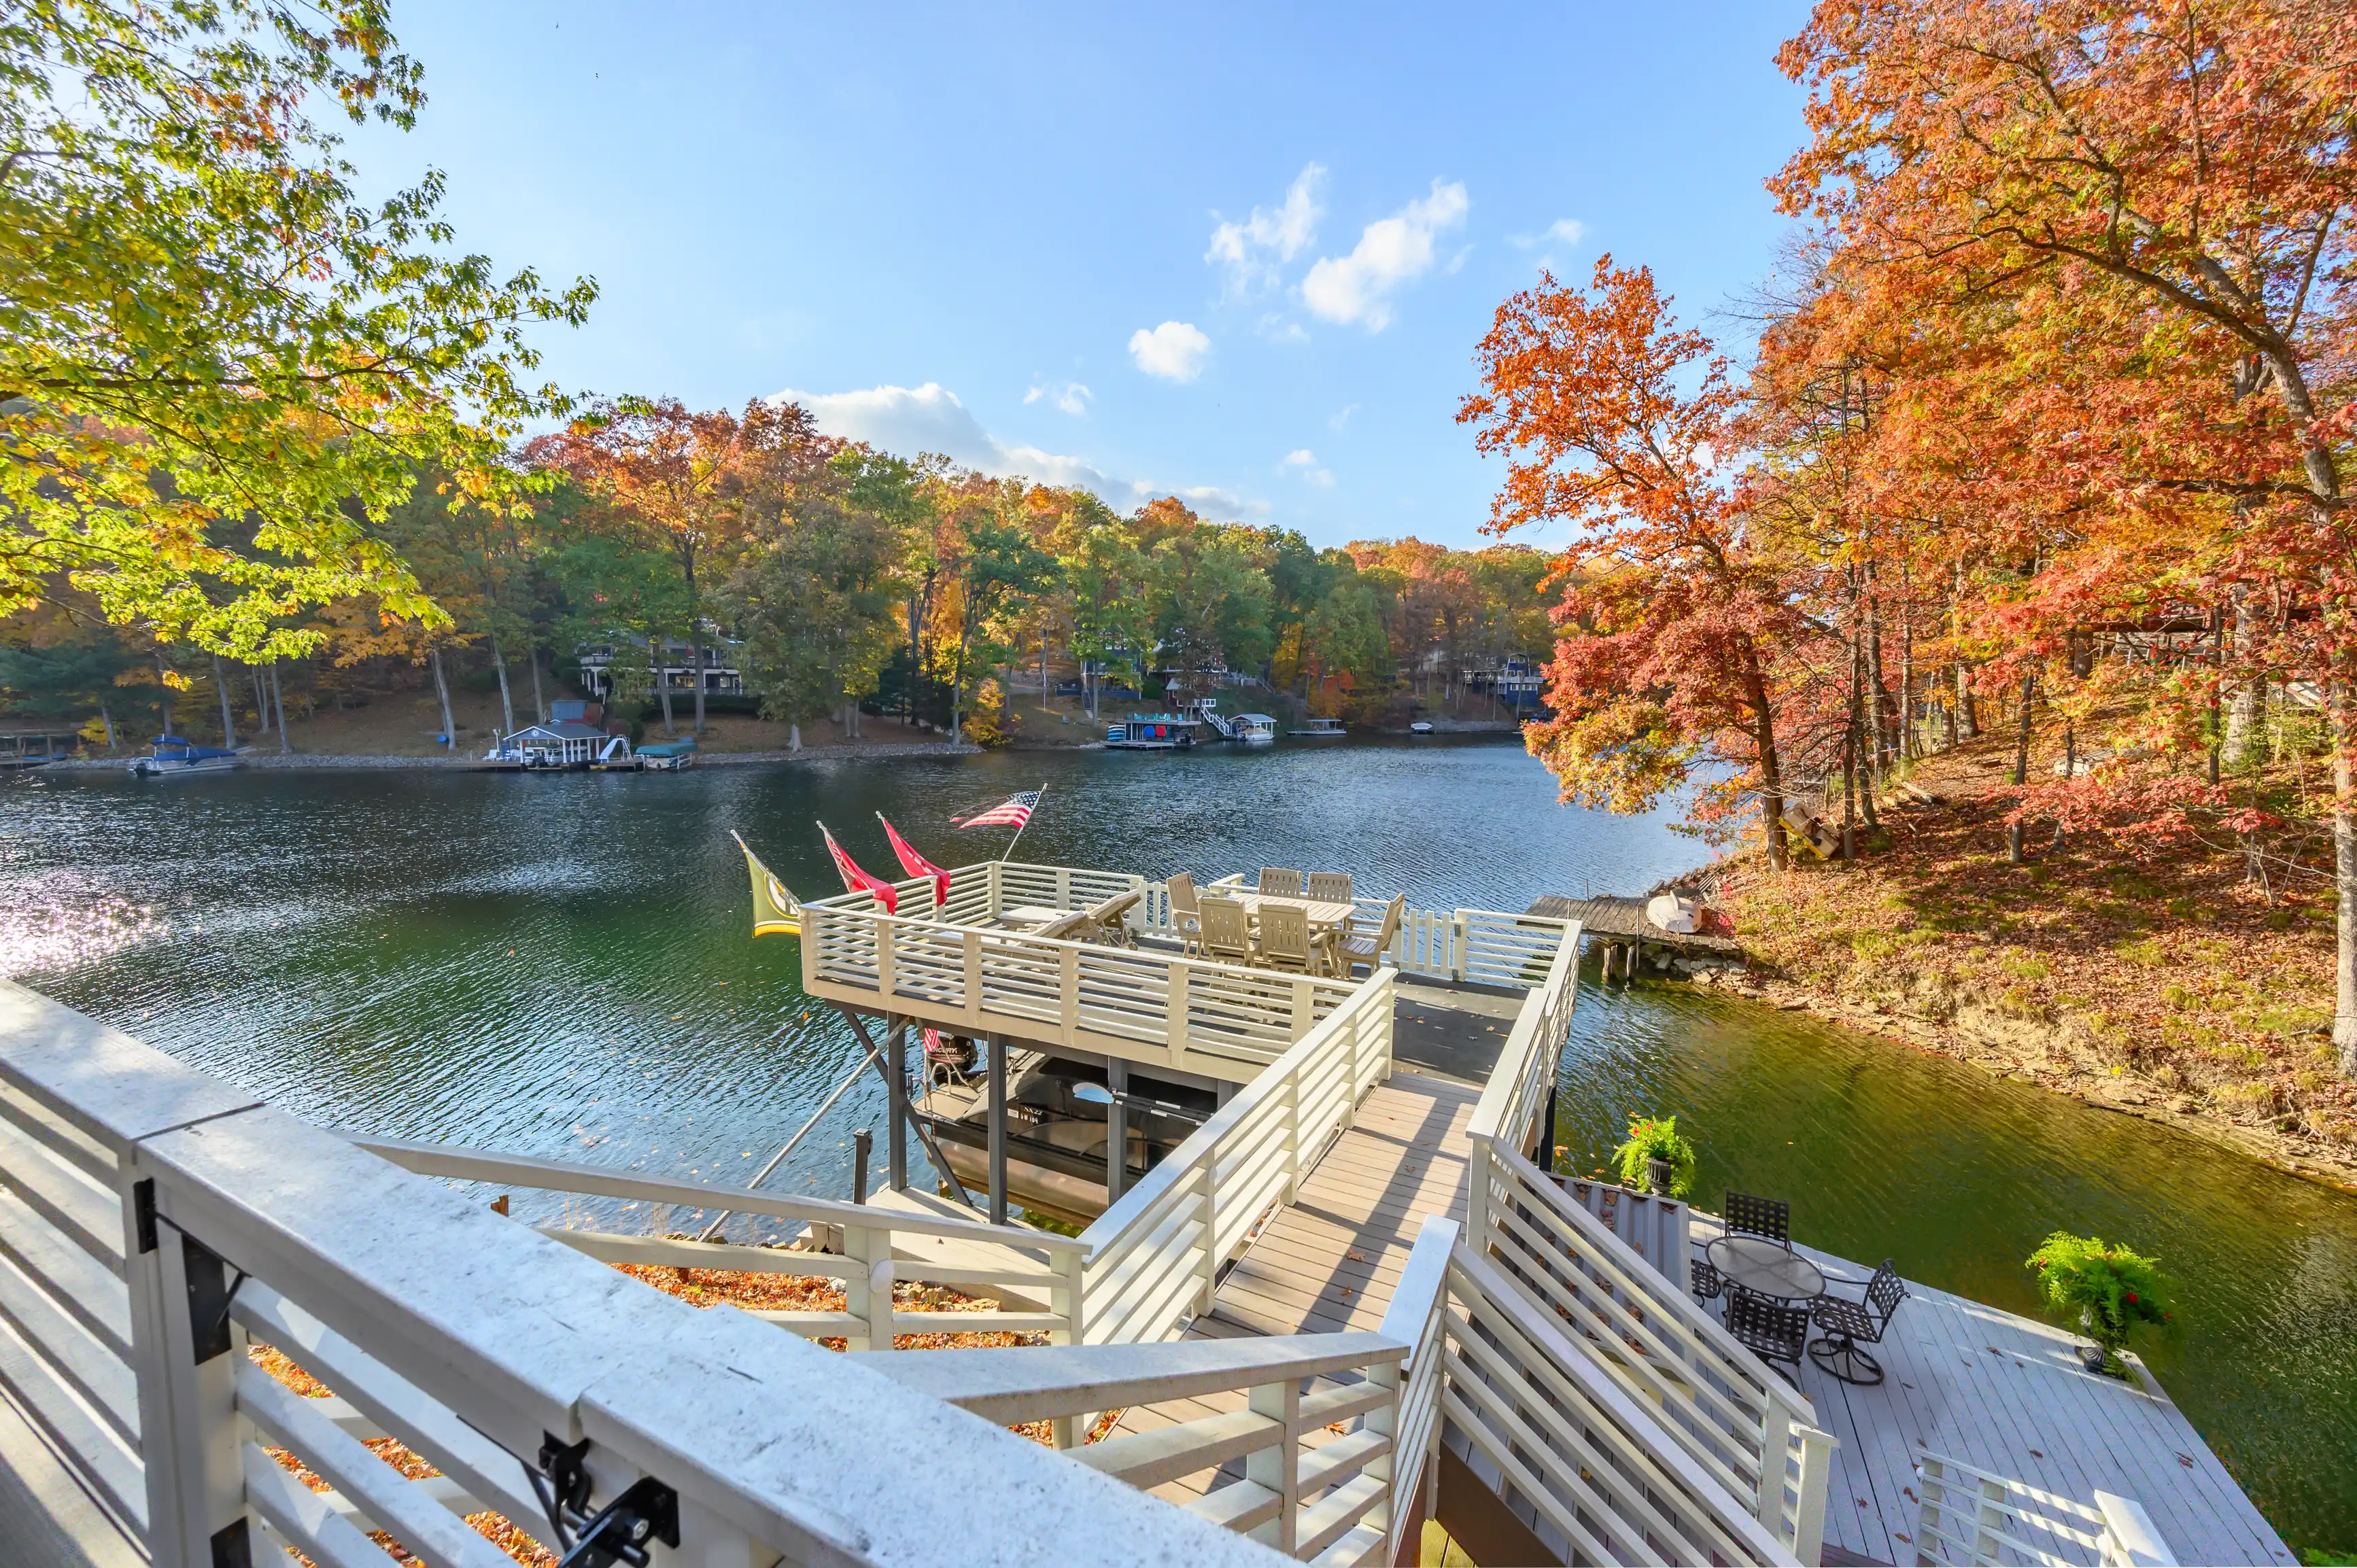 A scenic view from a deck overlooking a lake surrounded by autumn-colored trees, with a boat dock and boats in the distance.